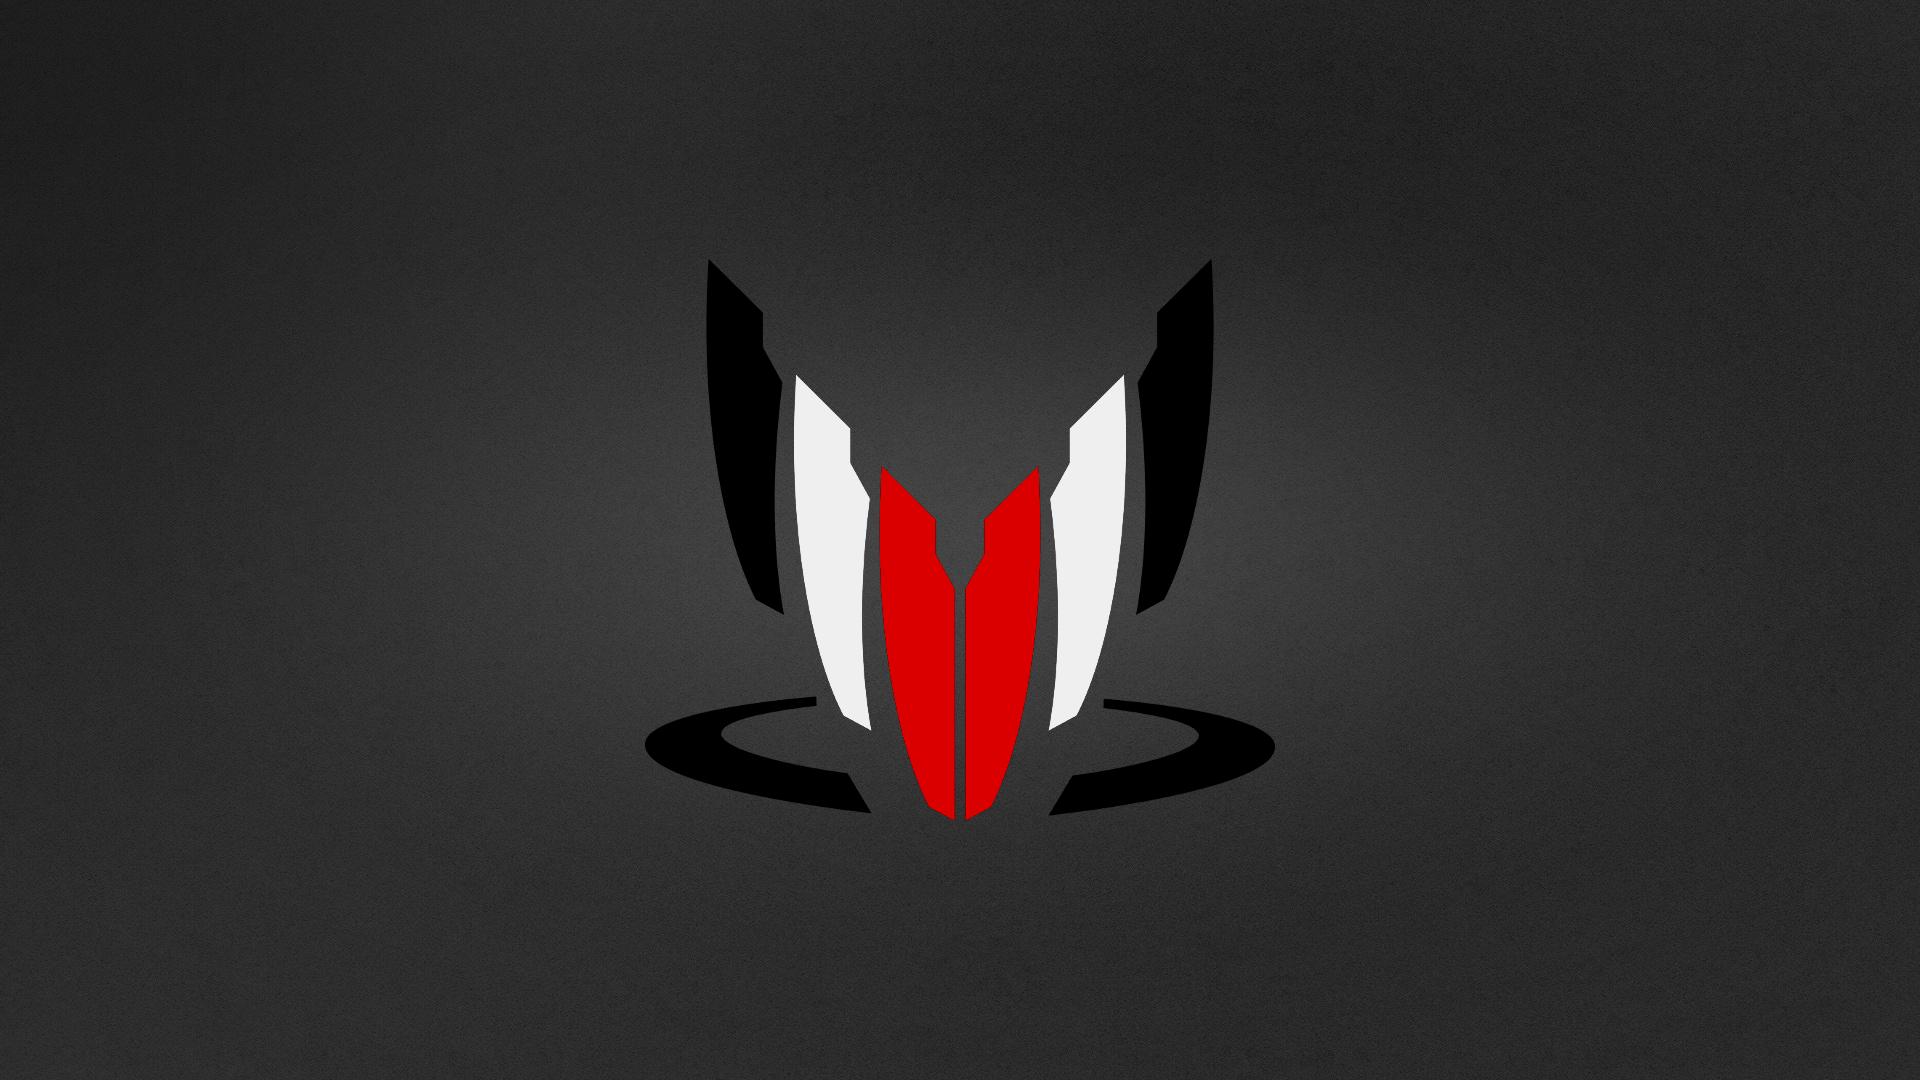 My brother made me a kickass wallpaper. Spectre logo with N7